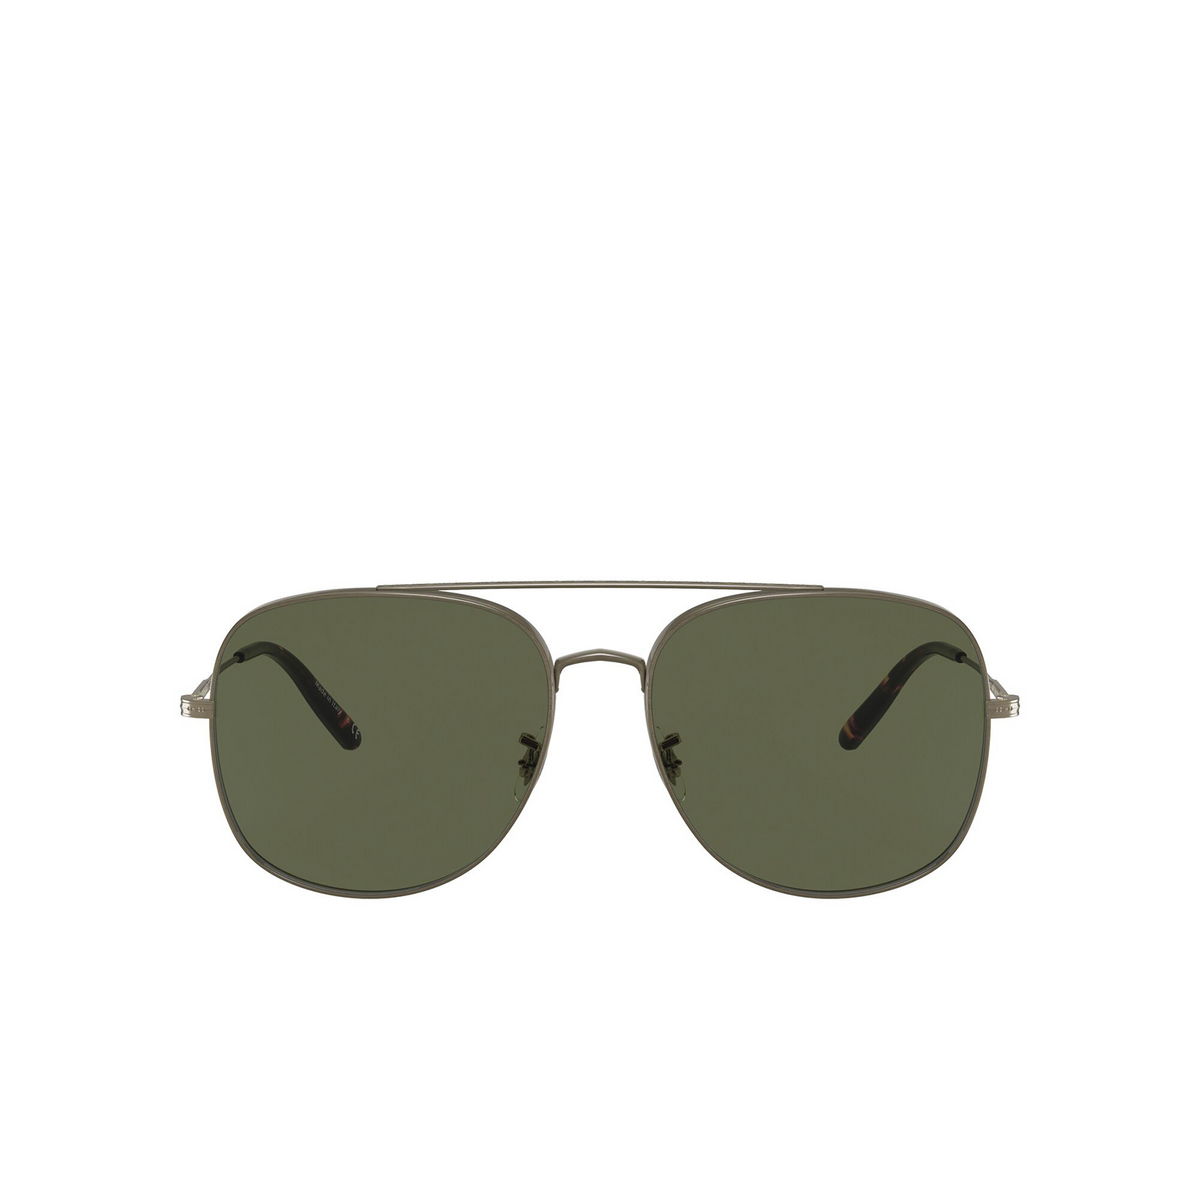 Oliver Peoples® Aviator Sunglasses: Taron OV1272S color Antique Gold 528471 - front view.